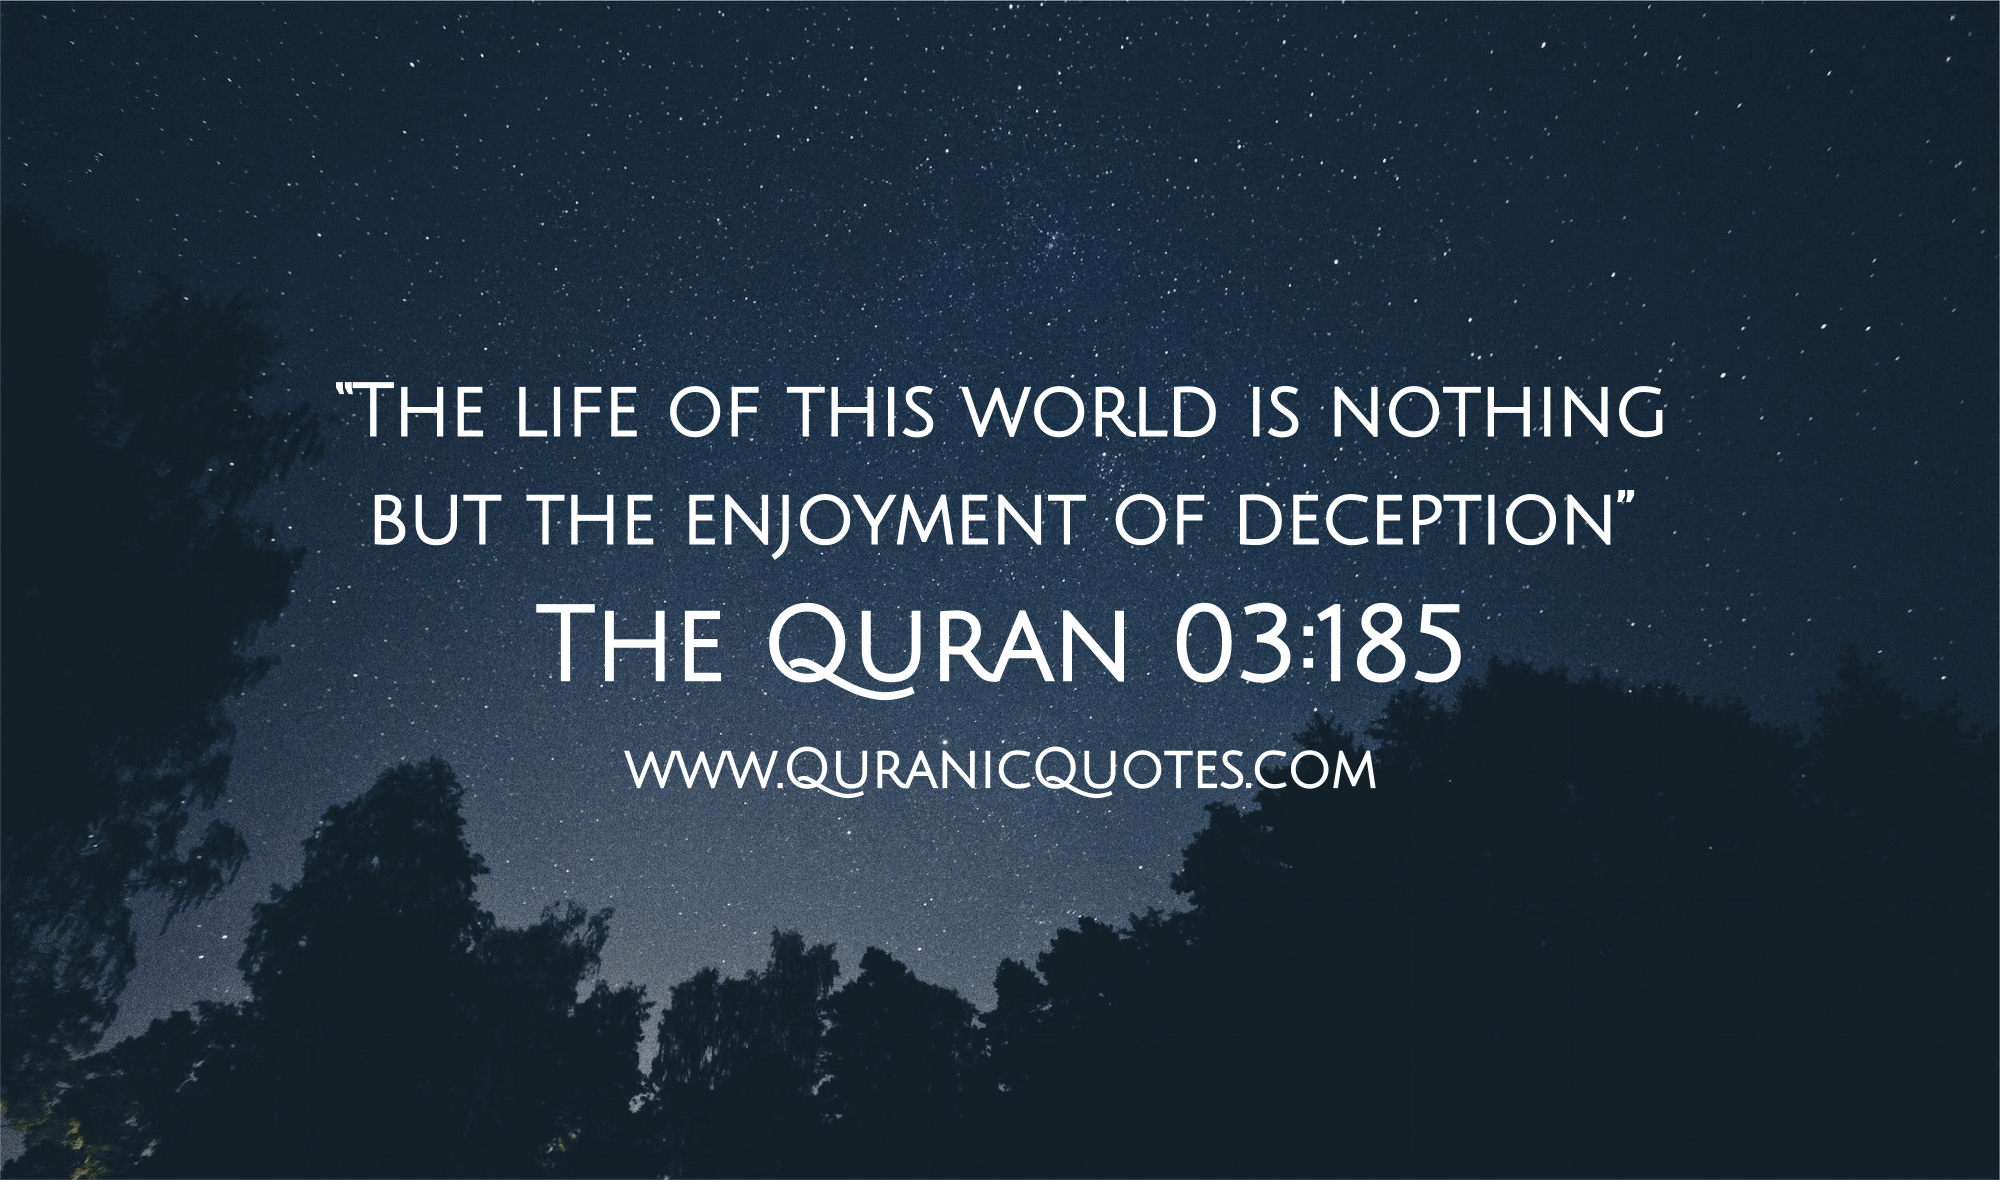 The world is nothing. Quran quotes. Quotes from Quran. Quranic quotes. Verses from Quran.